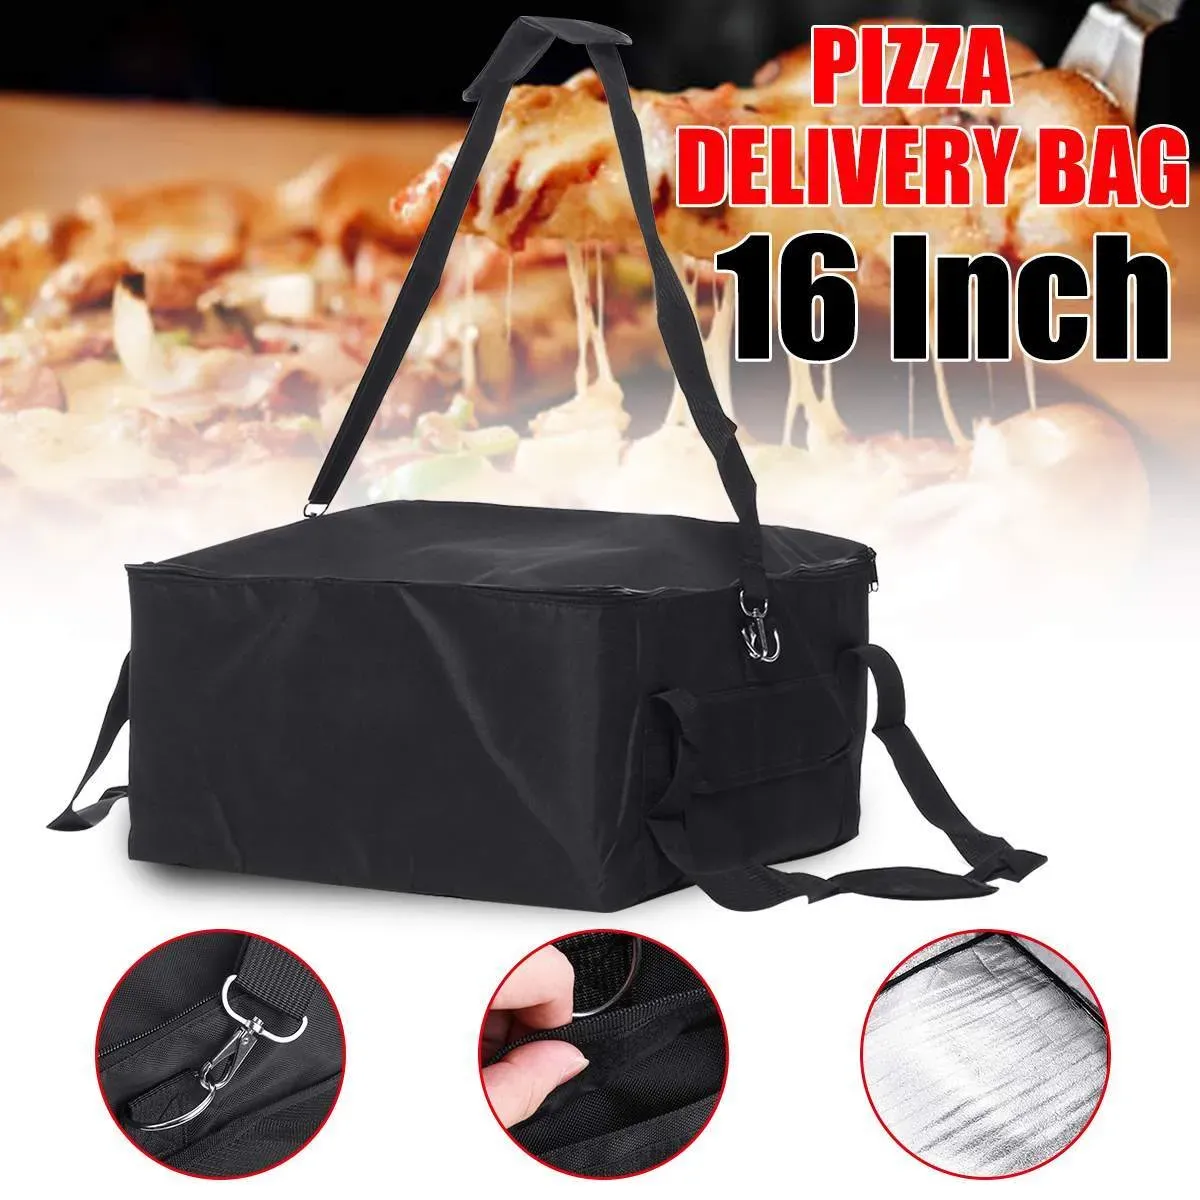 16 Inch Portable Insulated Thermal Food Pizza Delivery Bag 42x42x23cm Insulated Picnic Lunch Box ice pack vehicle insulation bag 201015